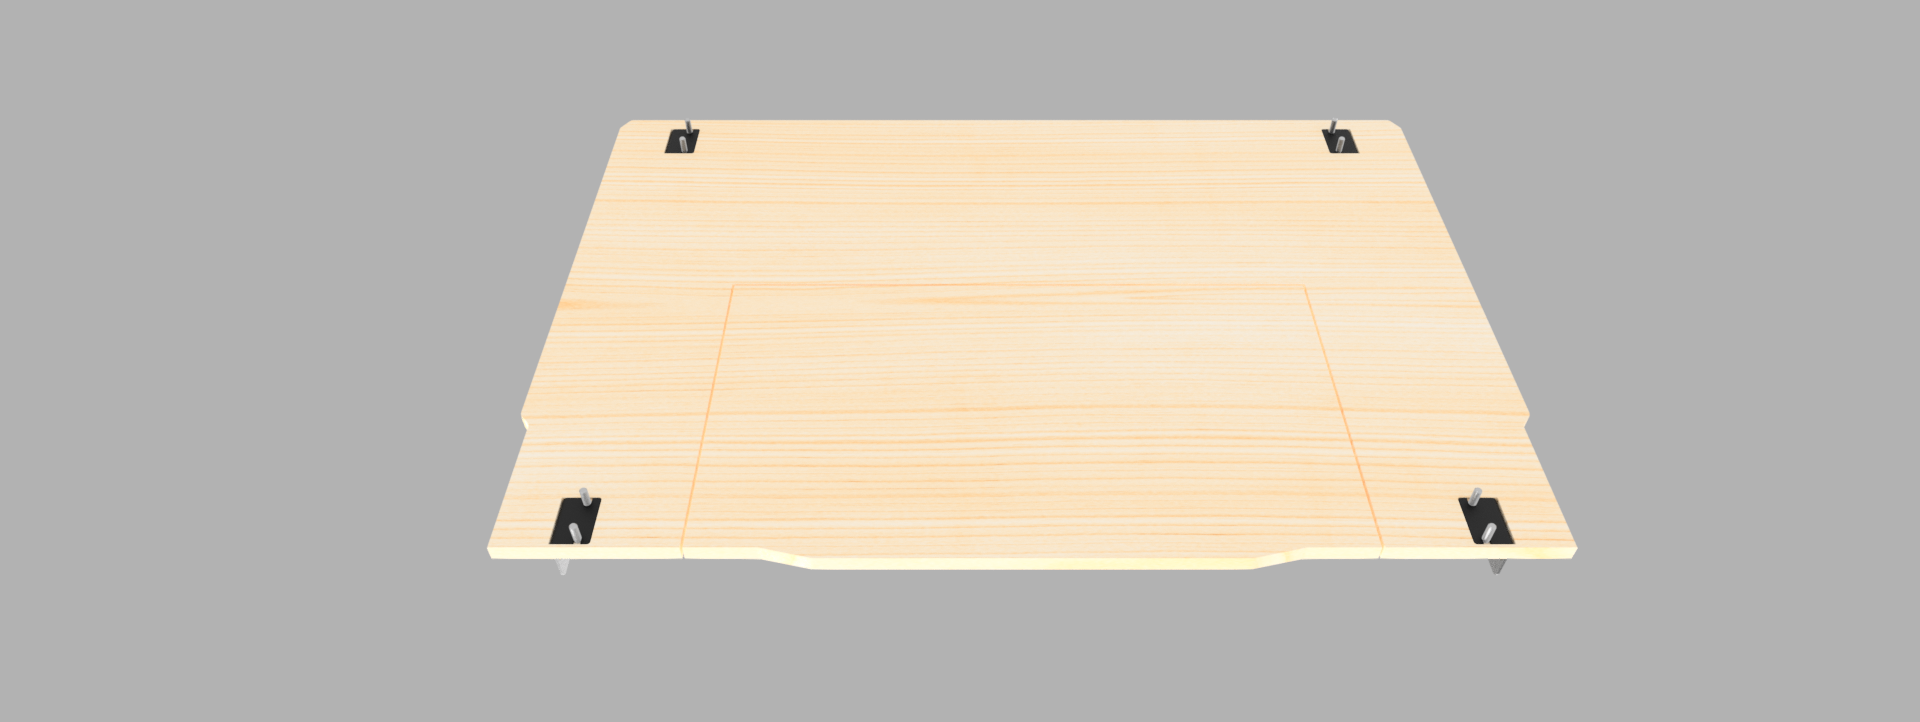 Ford Bronco Open-Source: Trunk Storage System (Open TSS) Plywood Cargo Quick Slide version v6 BV